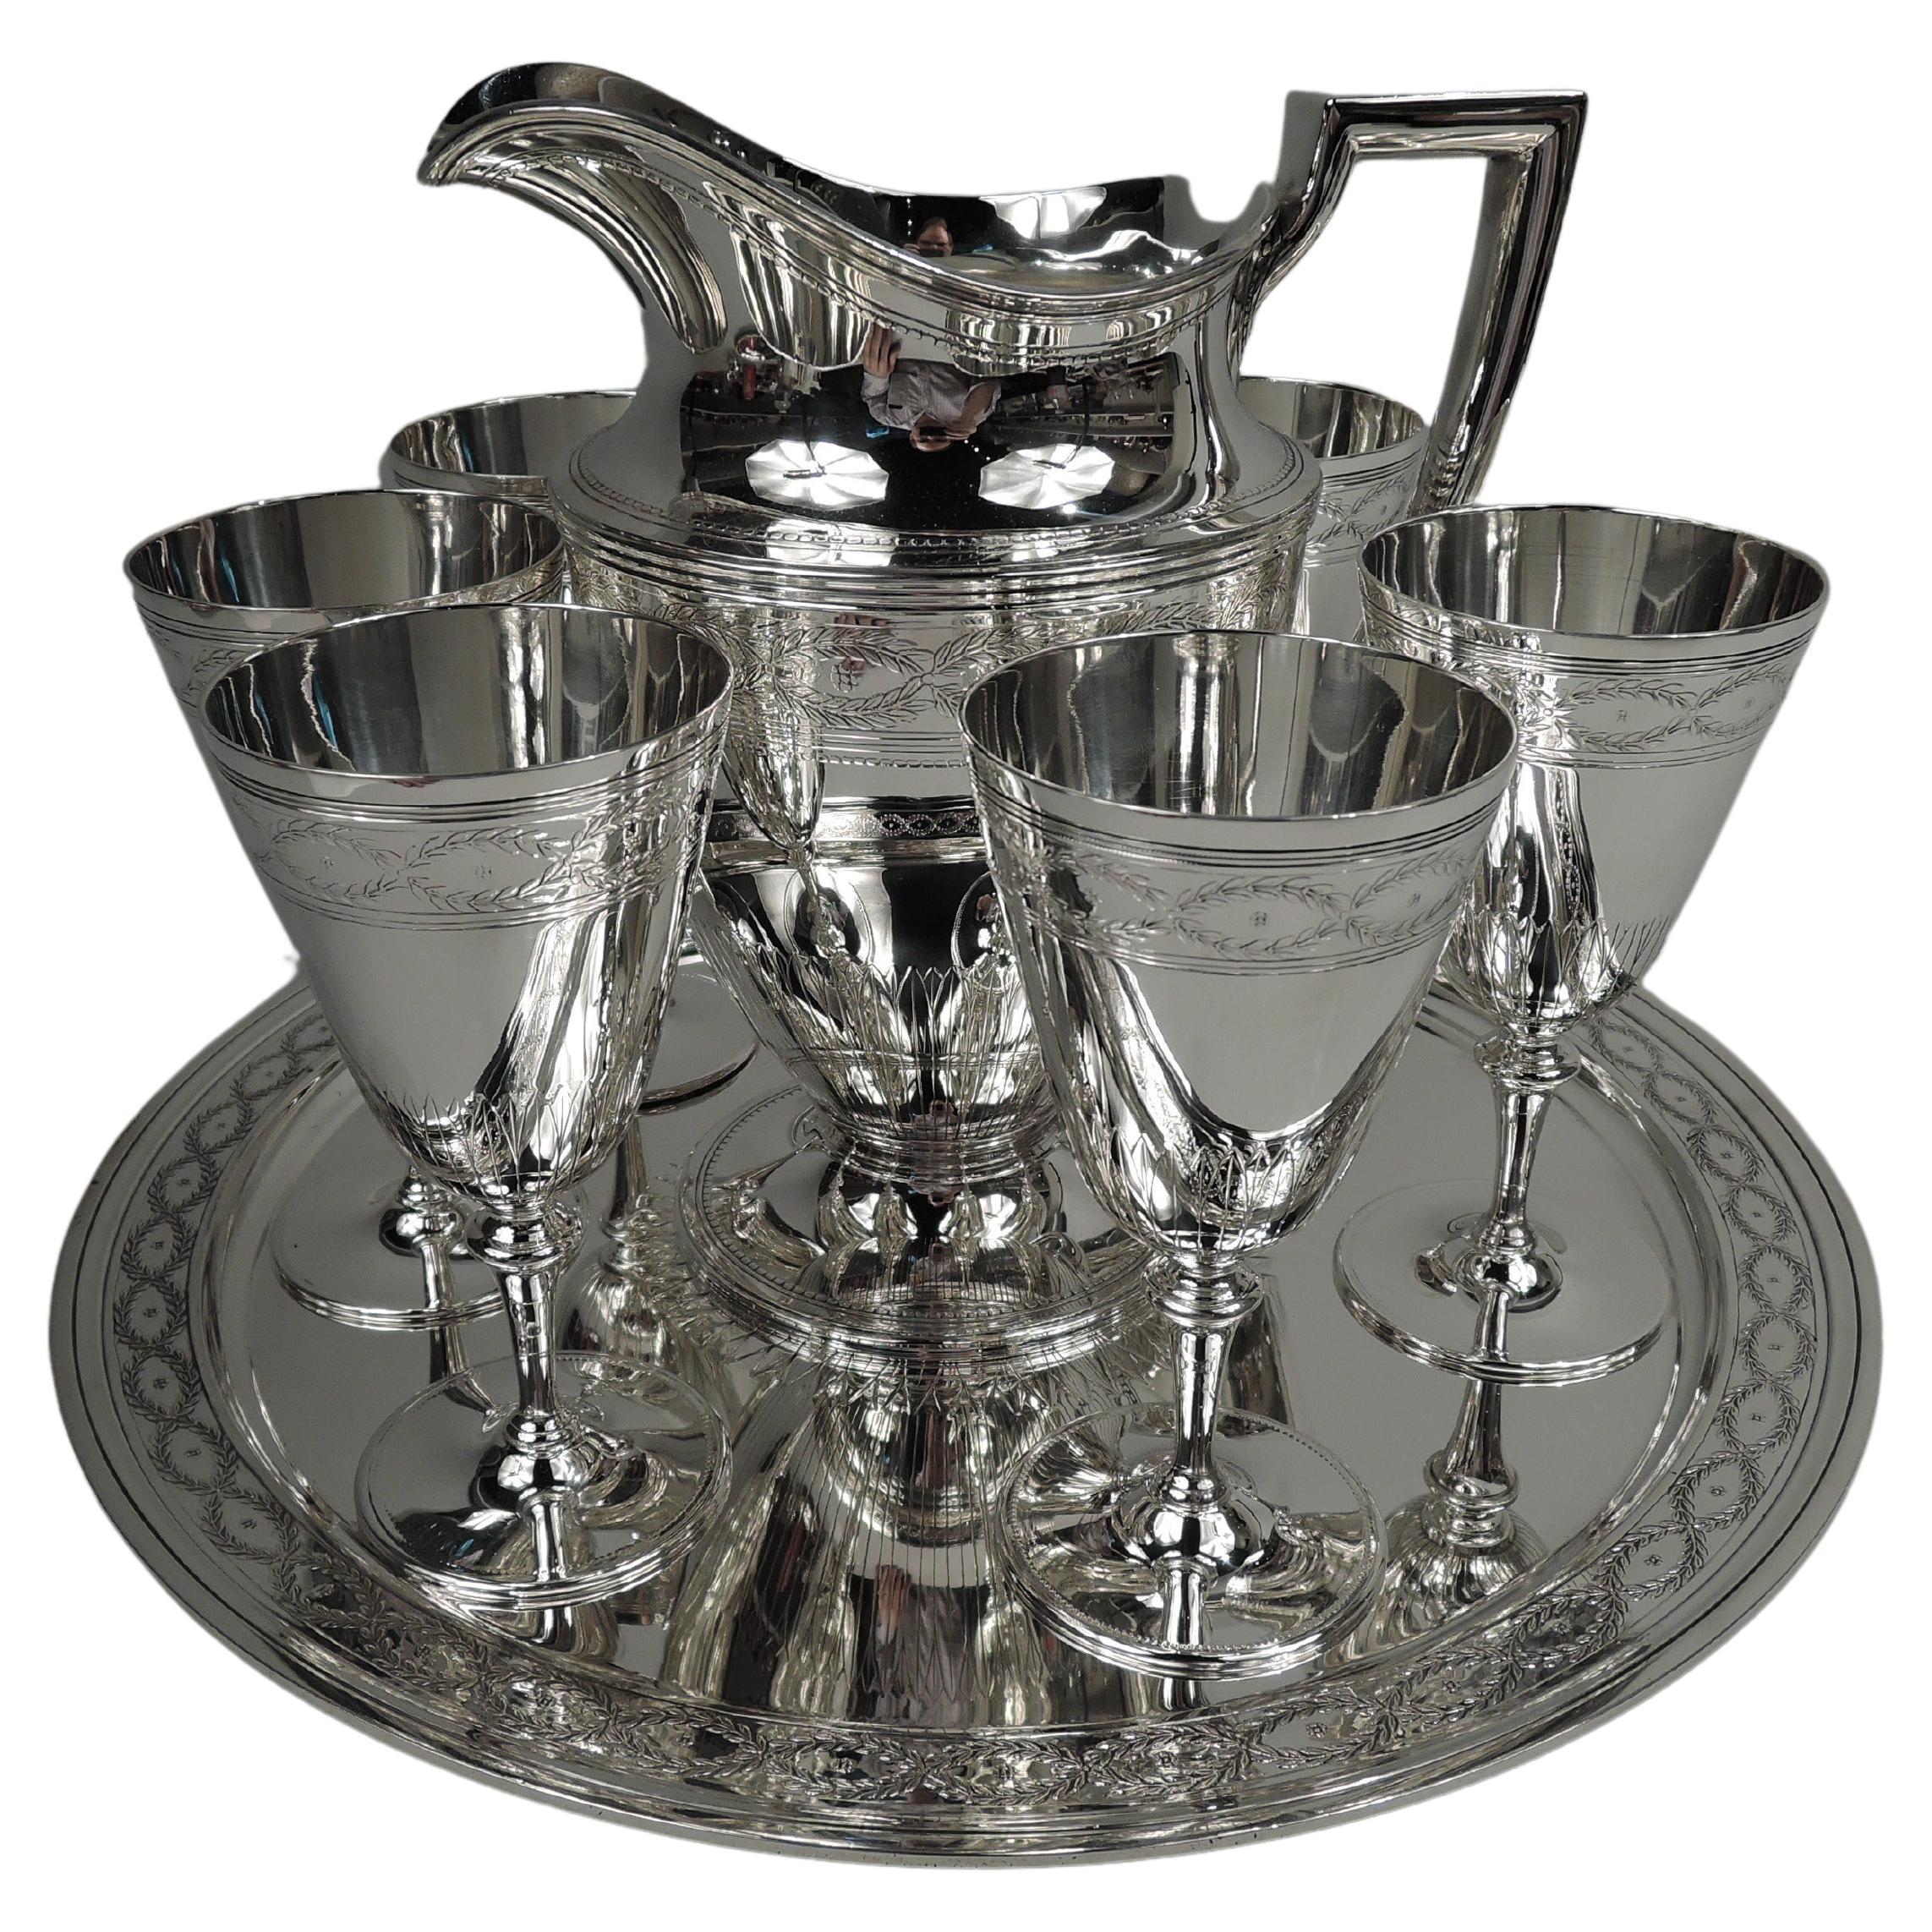 Tiffany Winthrop Drinks Set for 6 with Pitcher & Goblets on Tray For Sale